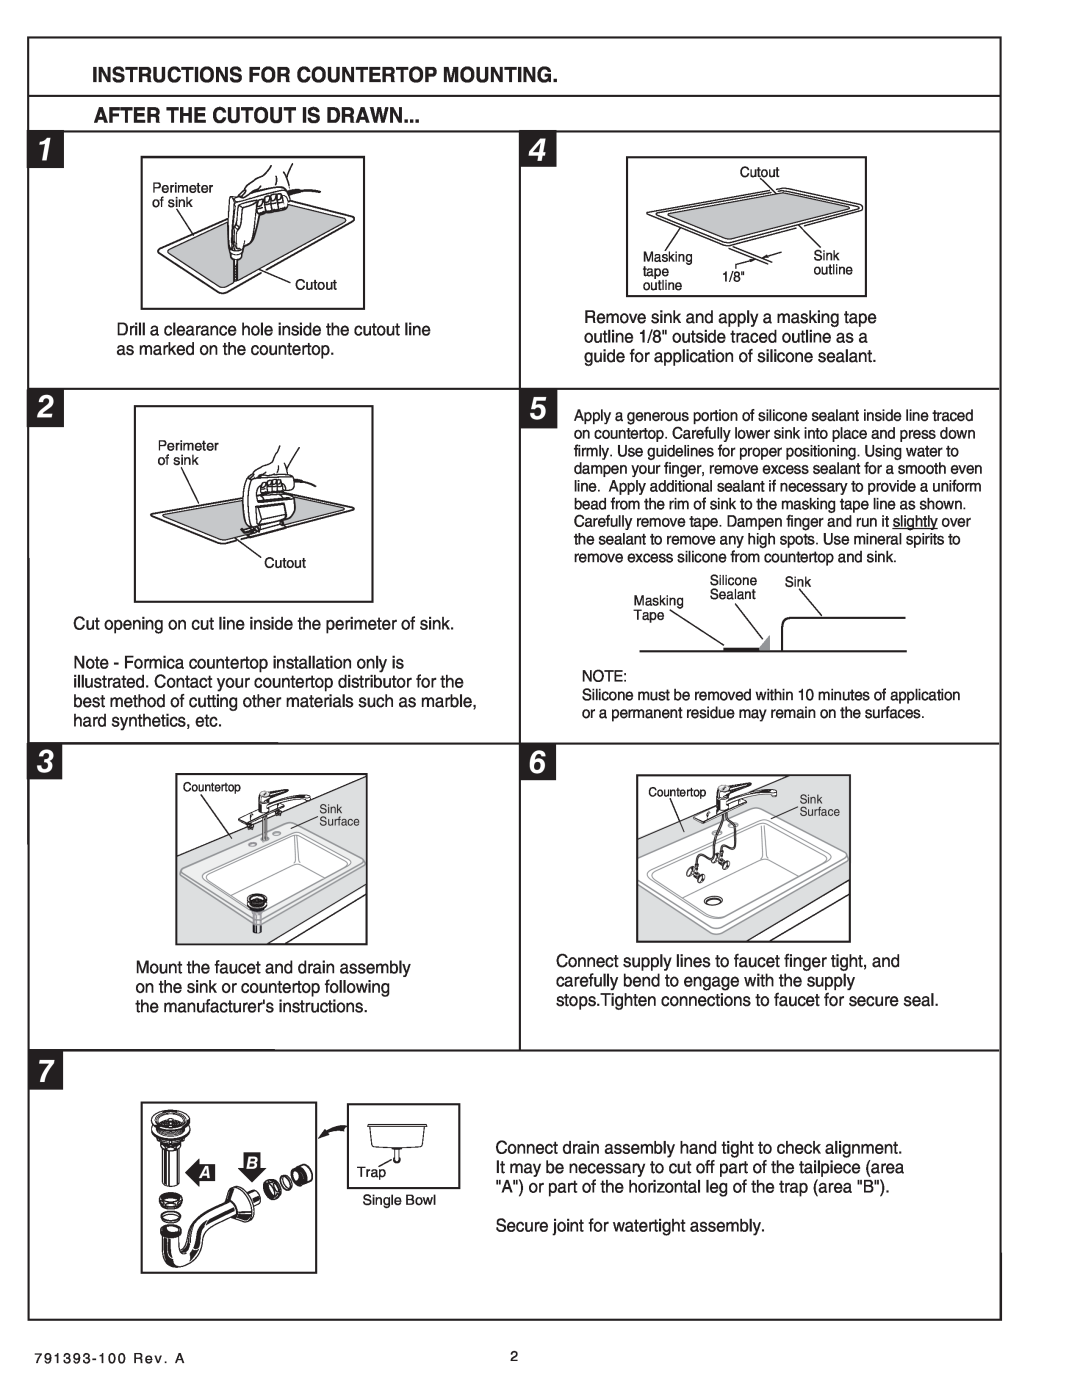 American Standard SERIES 7193 installation instructions Instructions For Countertop Mounting, After The Cutout Is Drawn 